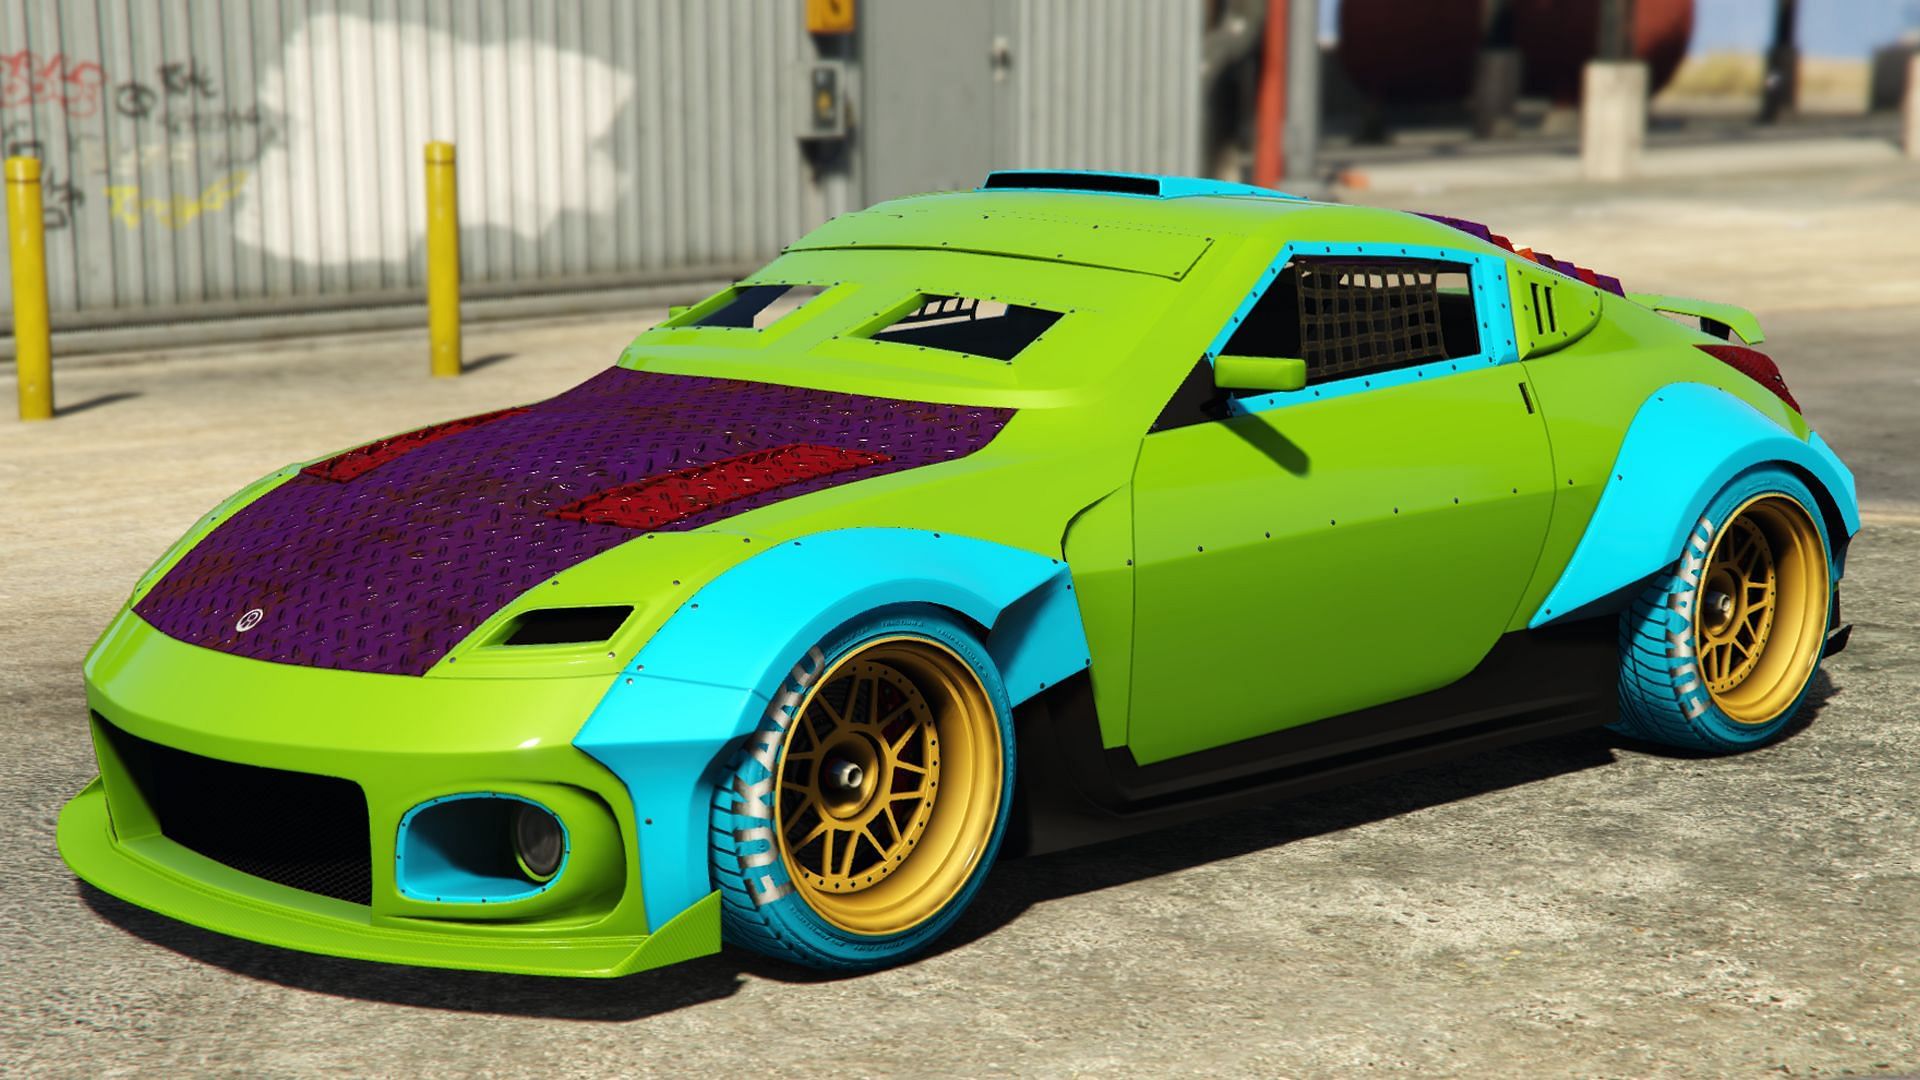 An example of how colorful the Nightmare version is (Image via GTA Wiki)